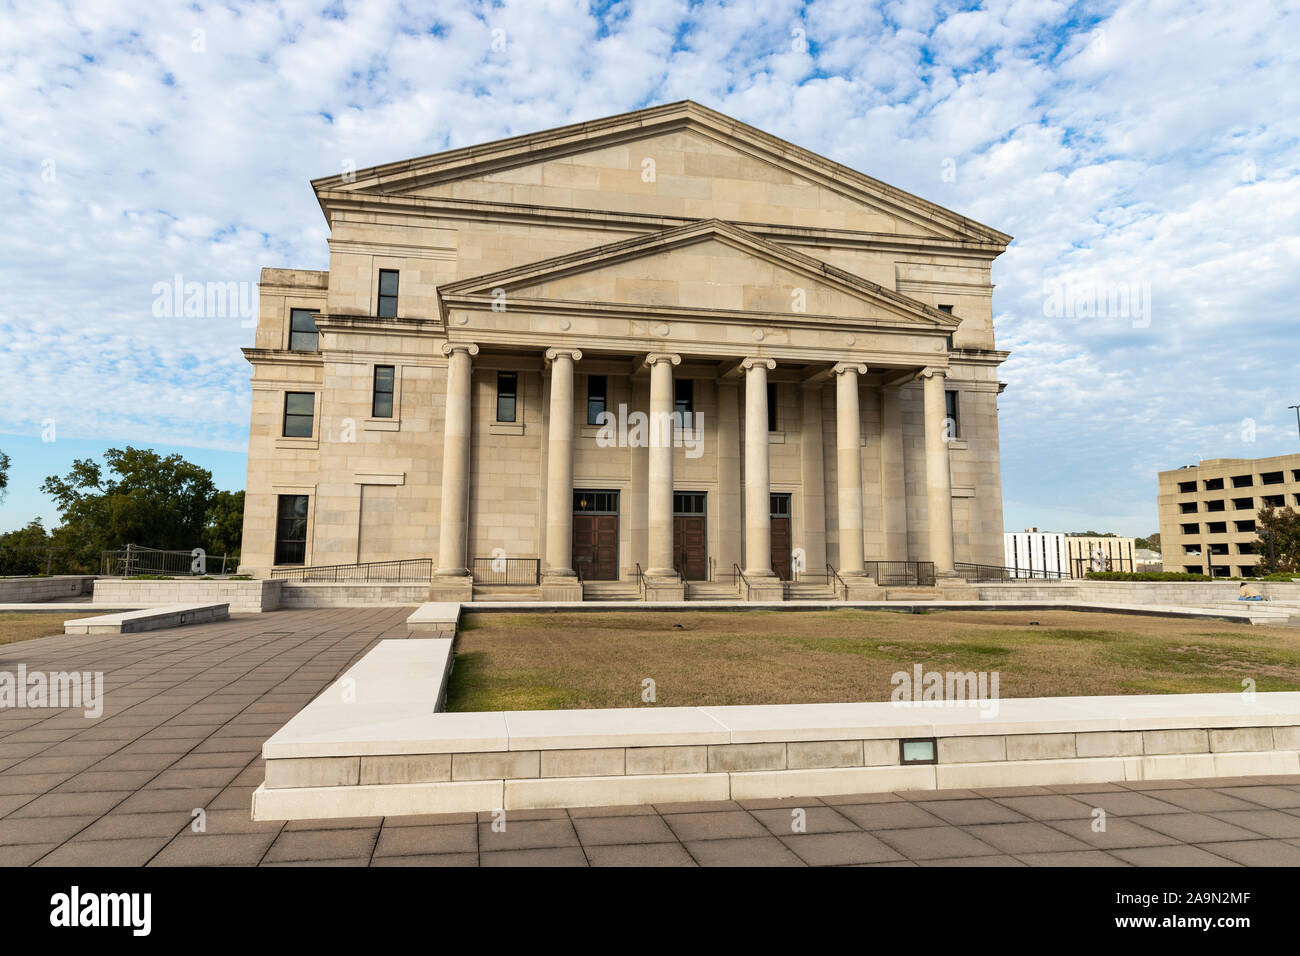 Jackson, MS /USA - November 4, 2019: Supreme Court of Mississippi building located in Jackson, MS Stock Photo